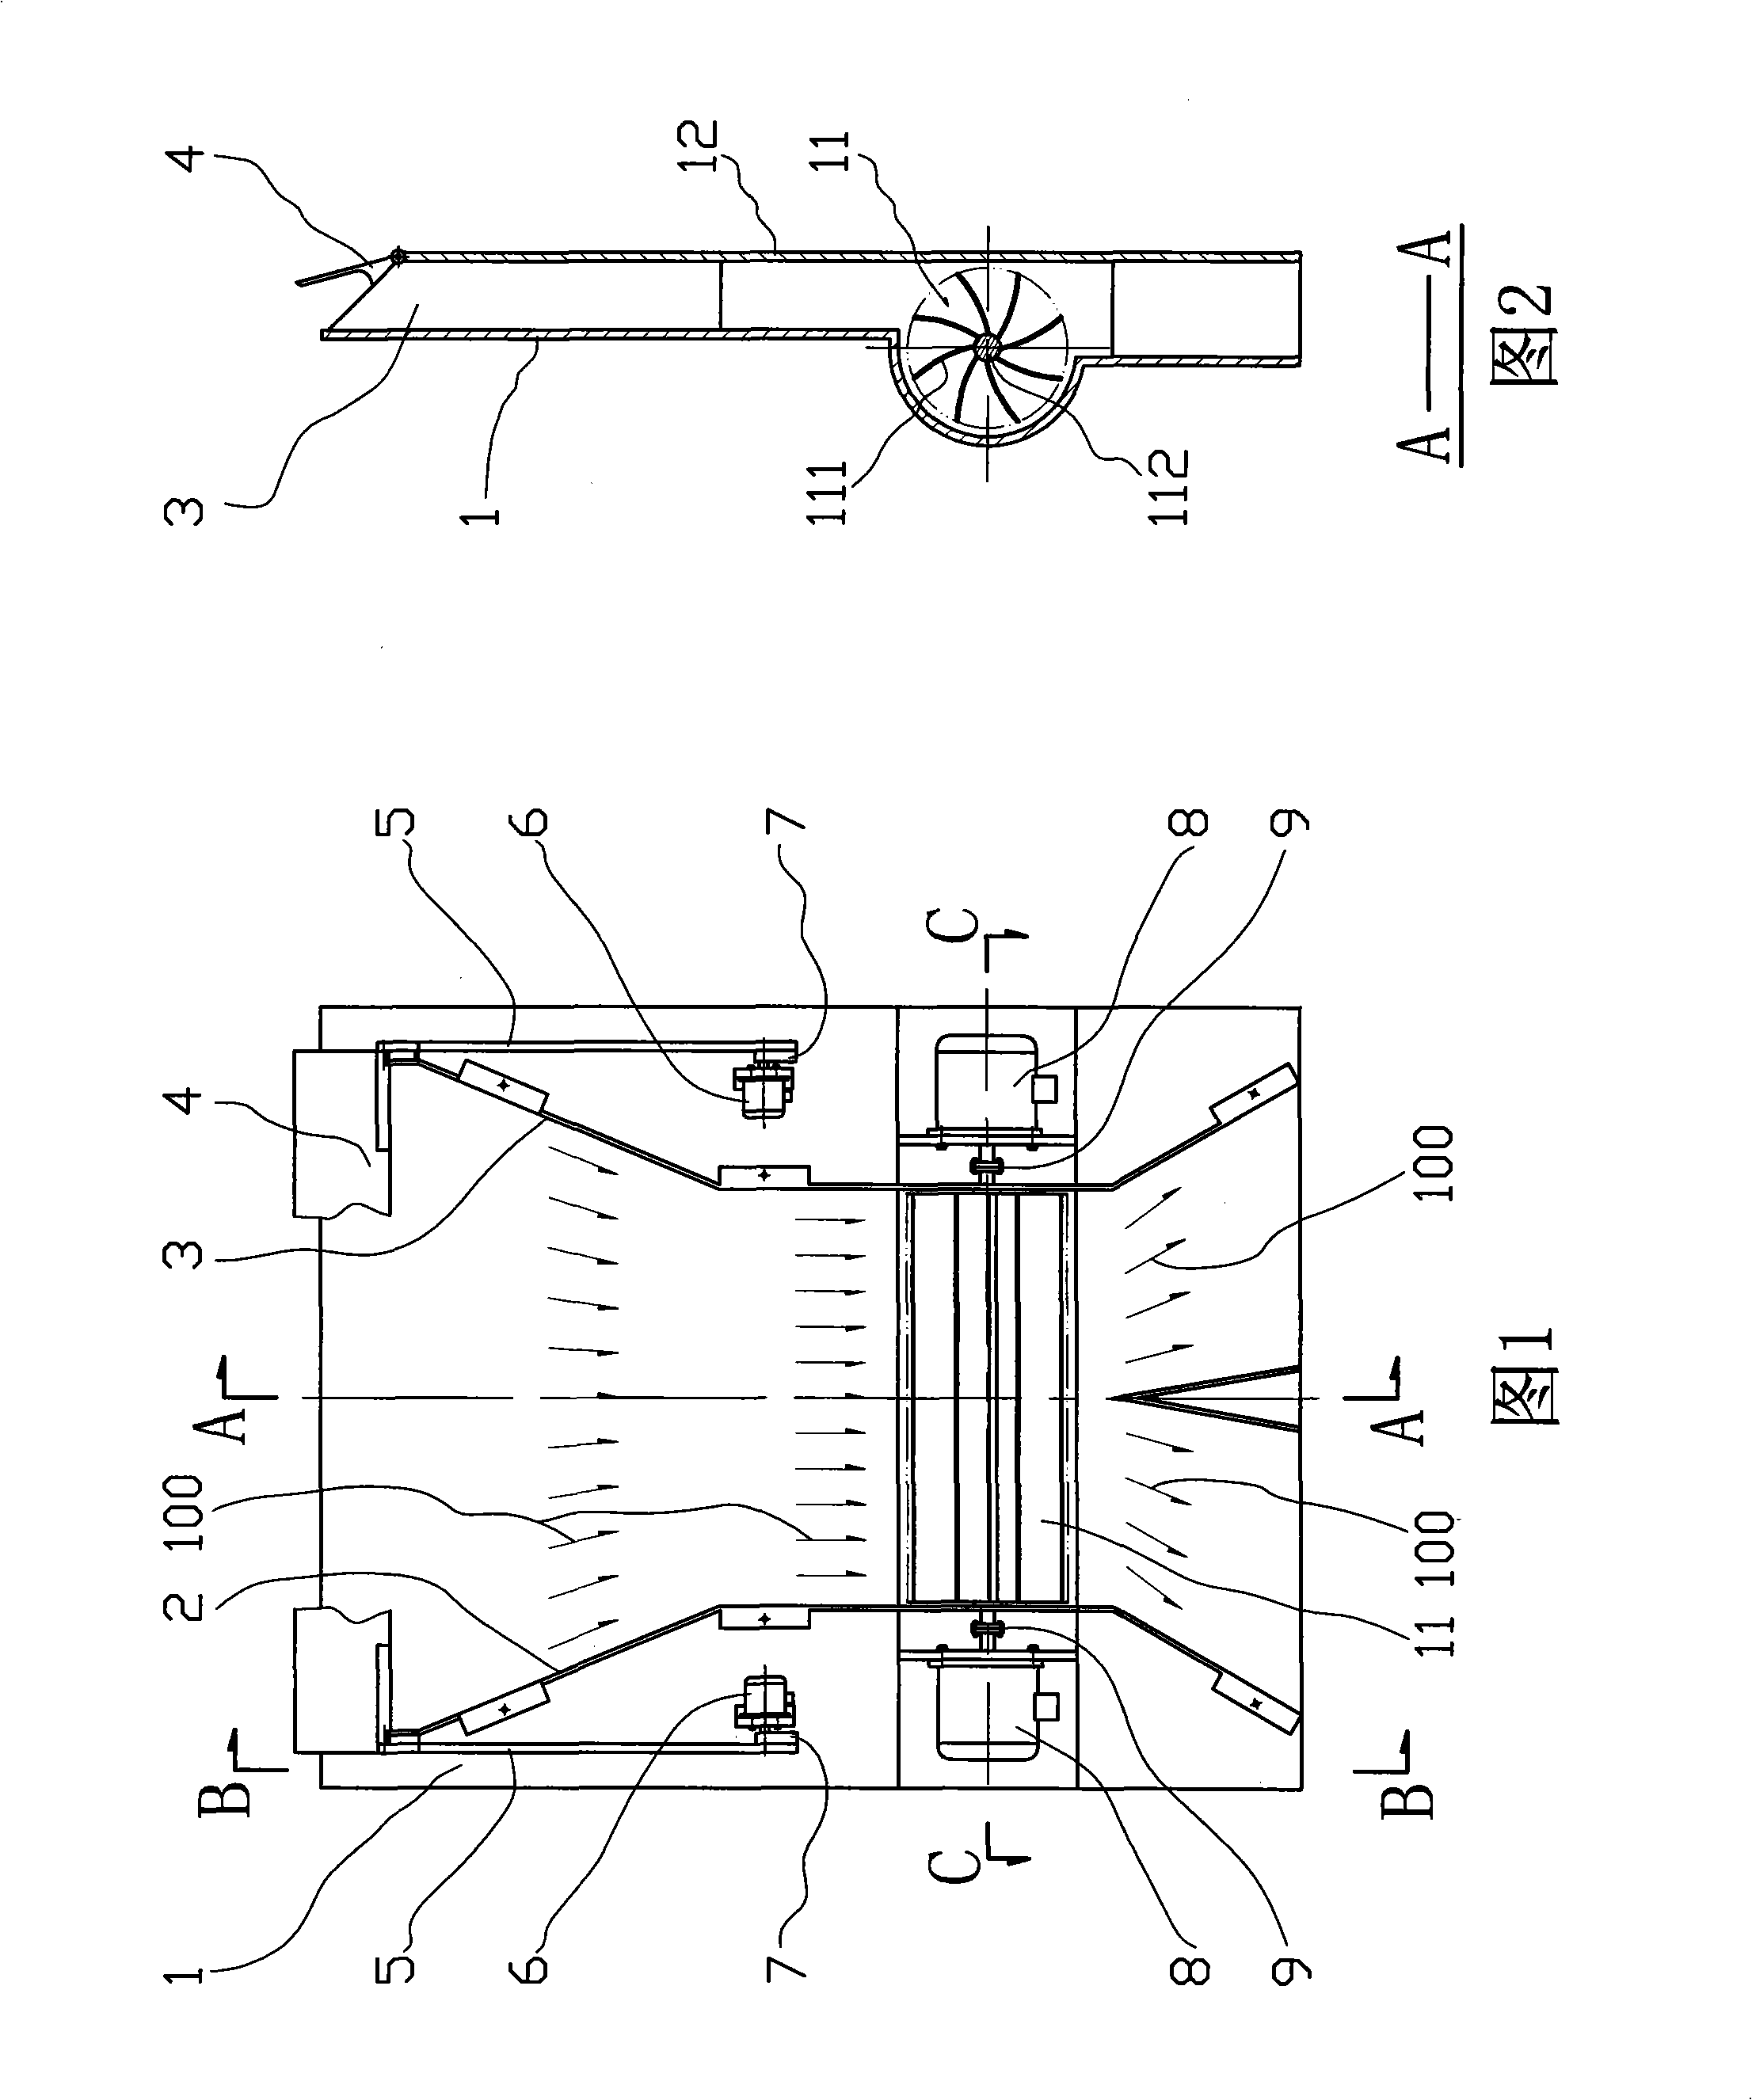 Automobile running wind electricity generating system